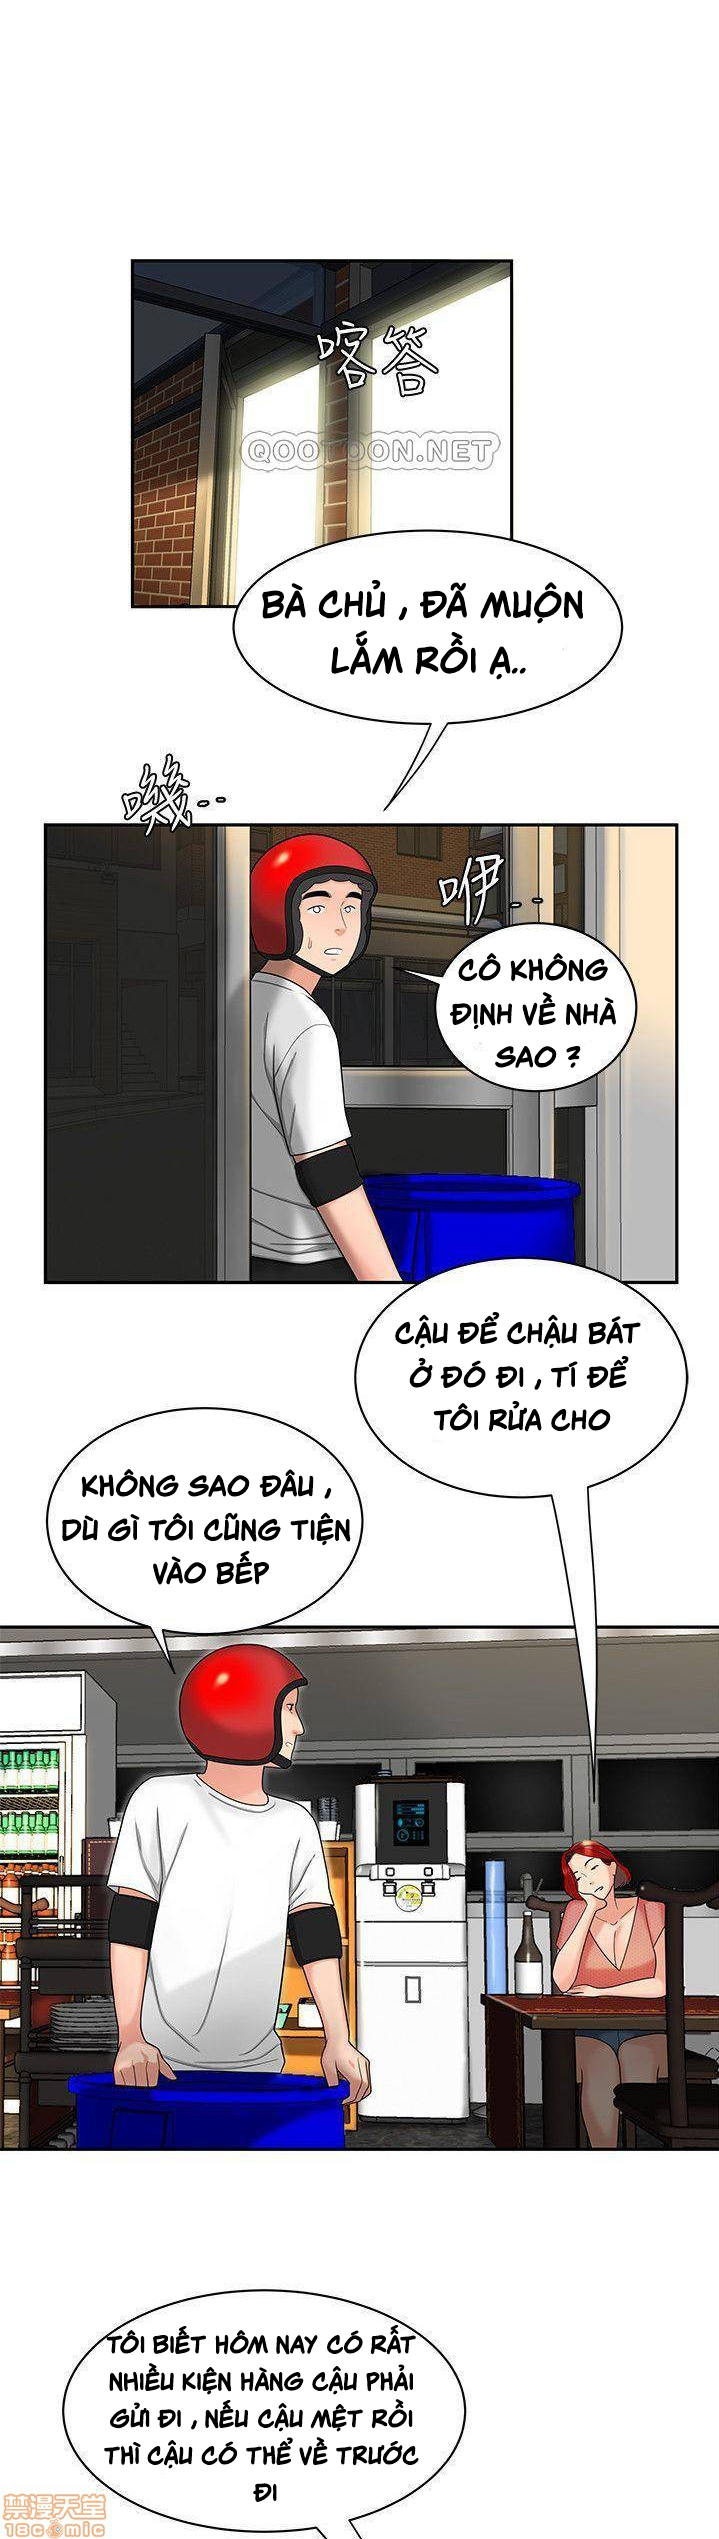 Chapter 001 : Chapter 01 ảnh 21